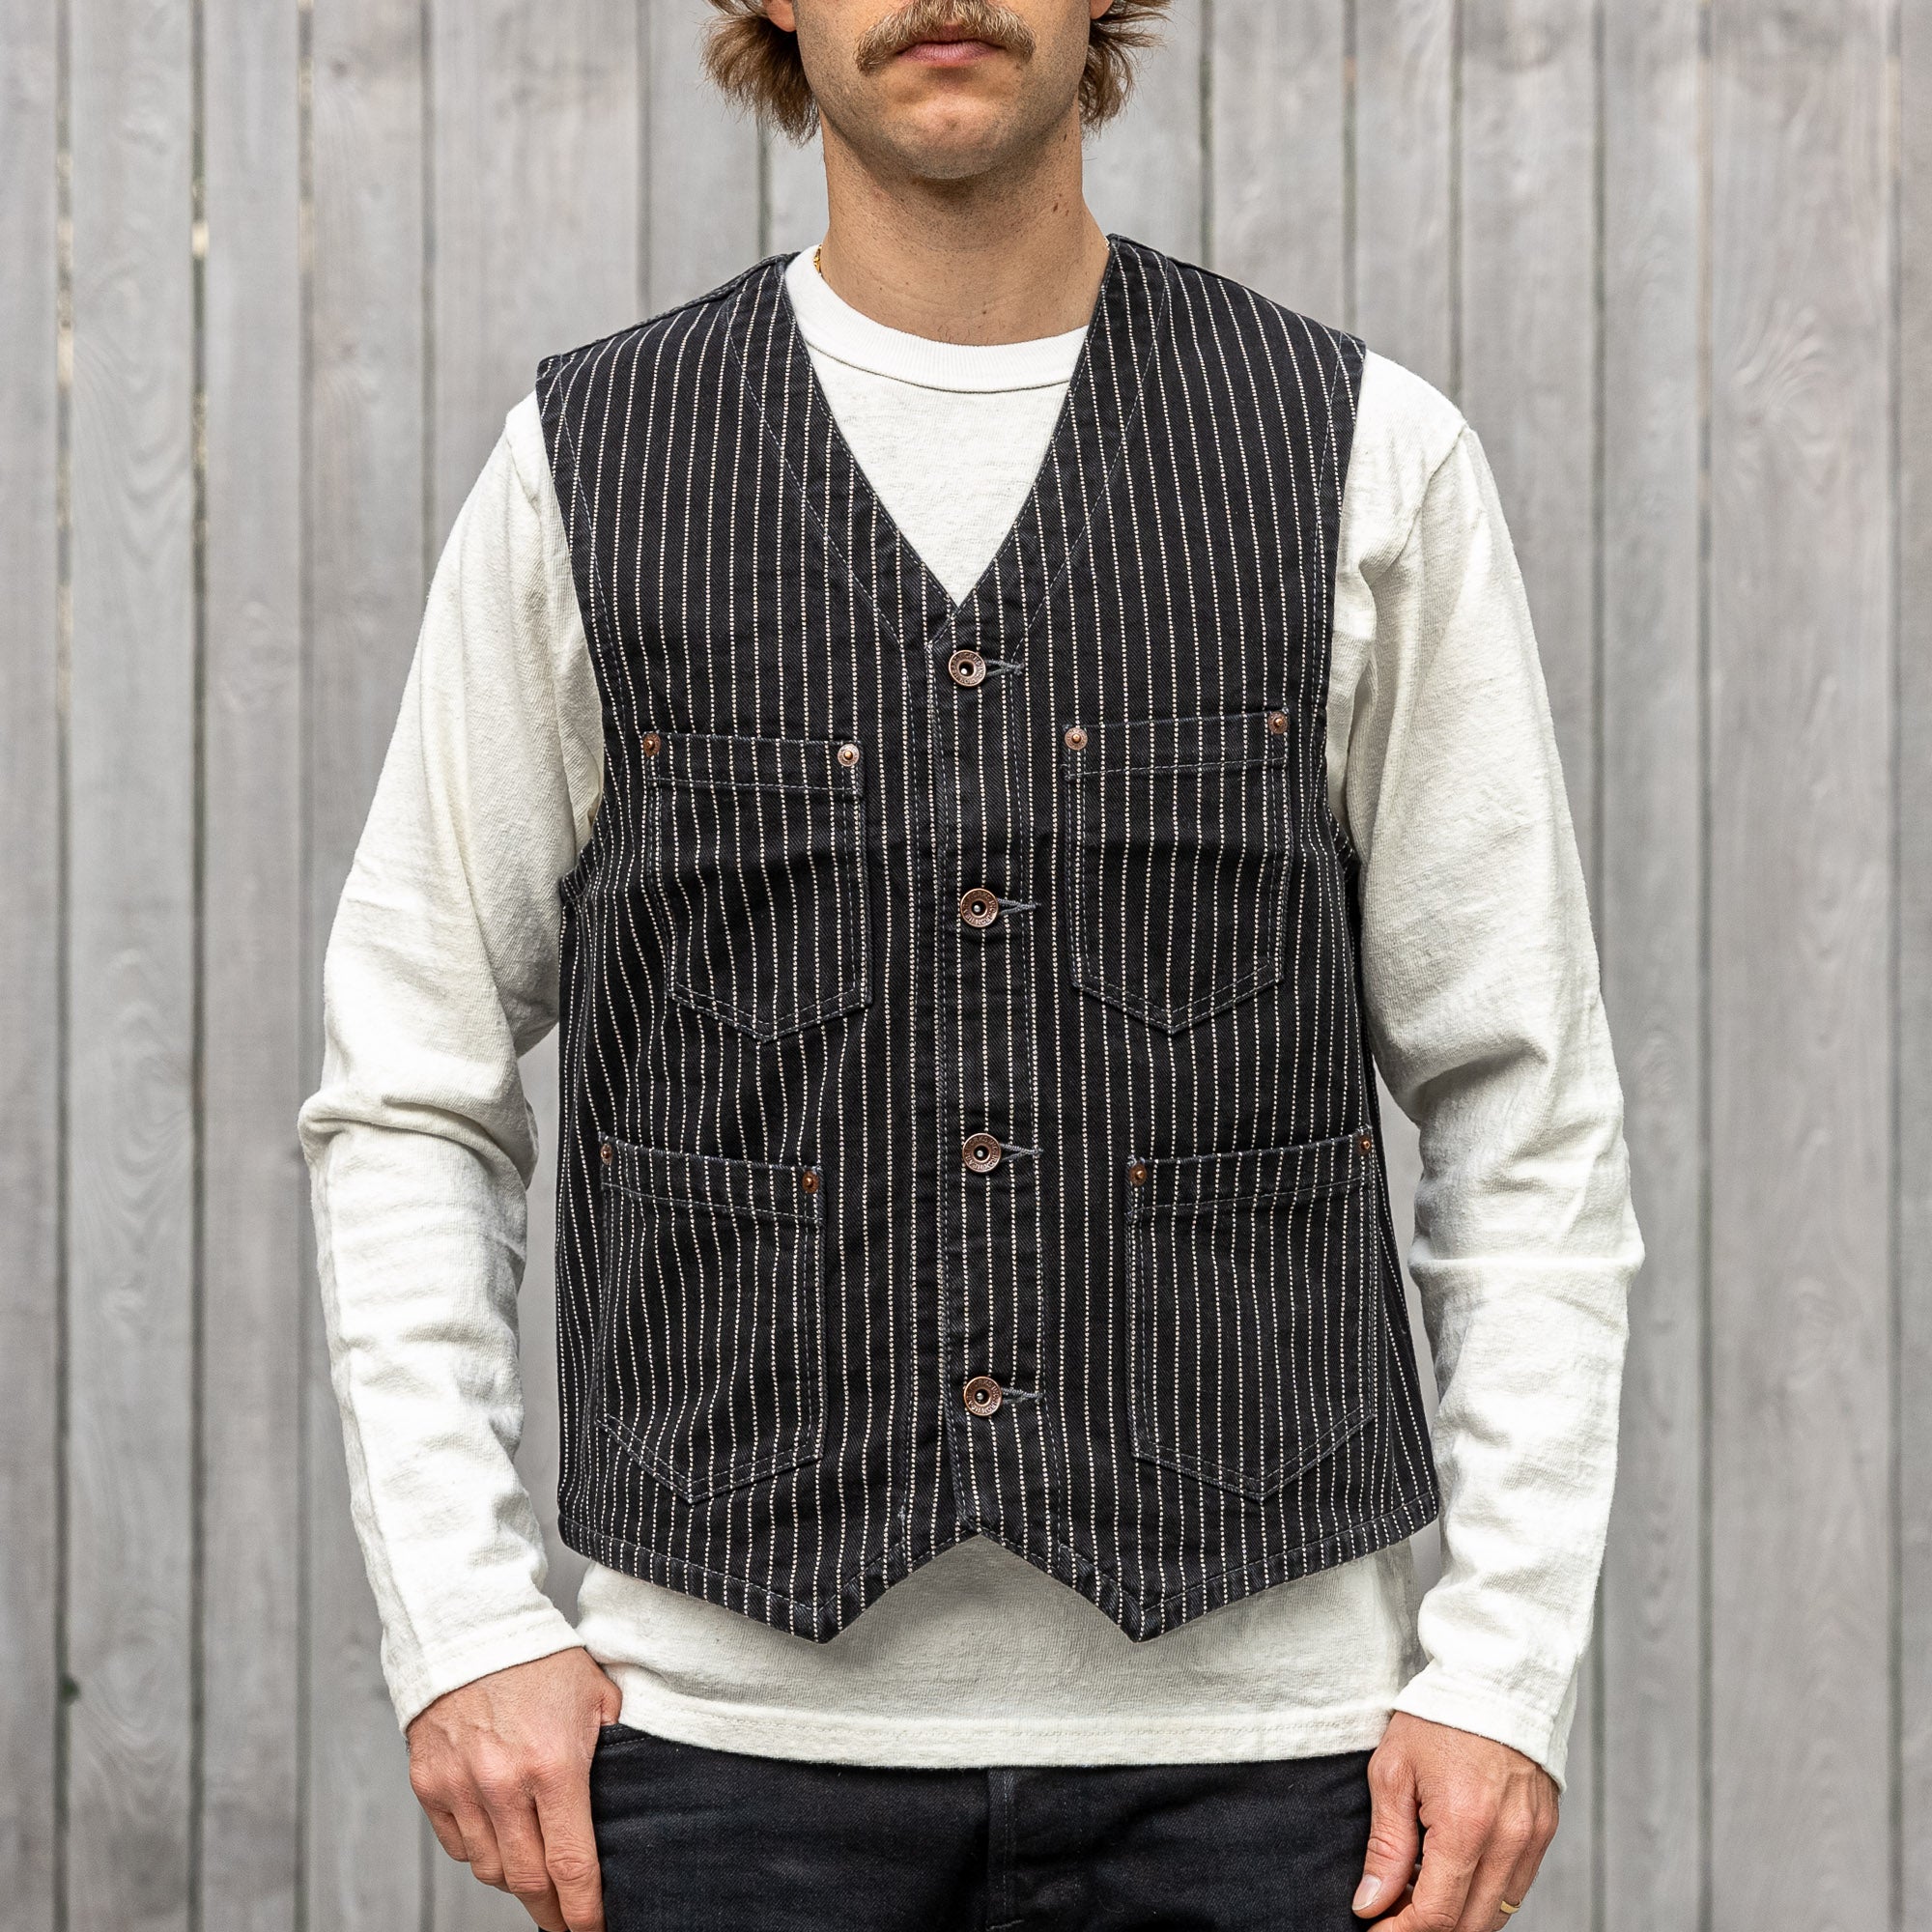 Vests from Samurai Jeans, Iron Heart & More